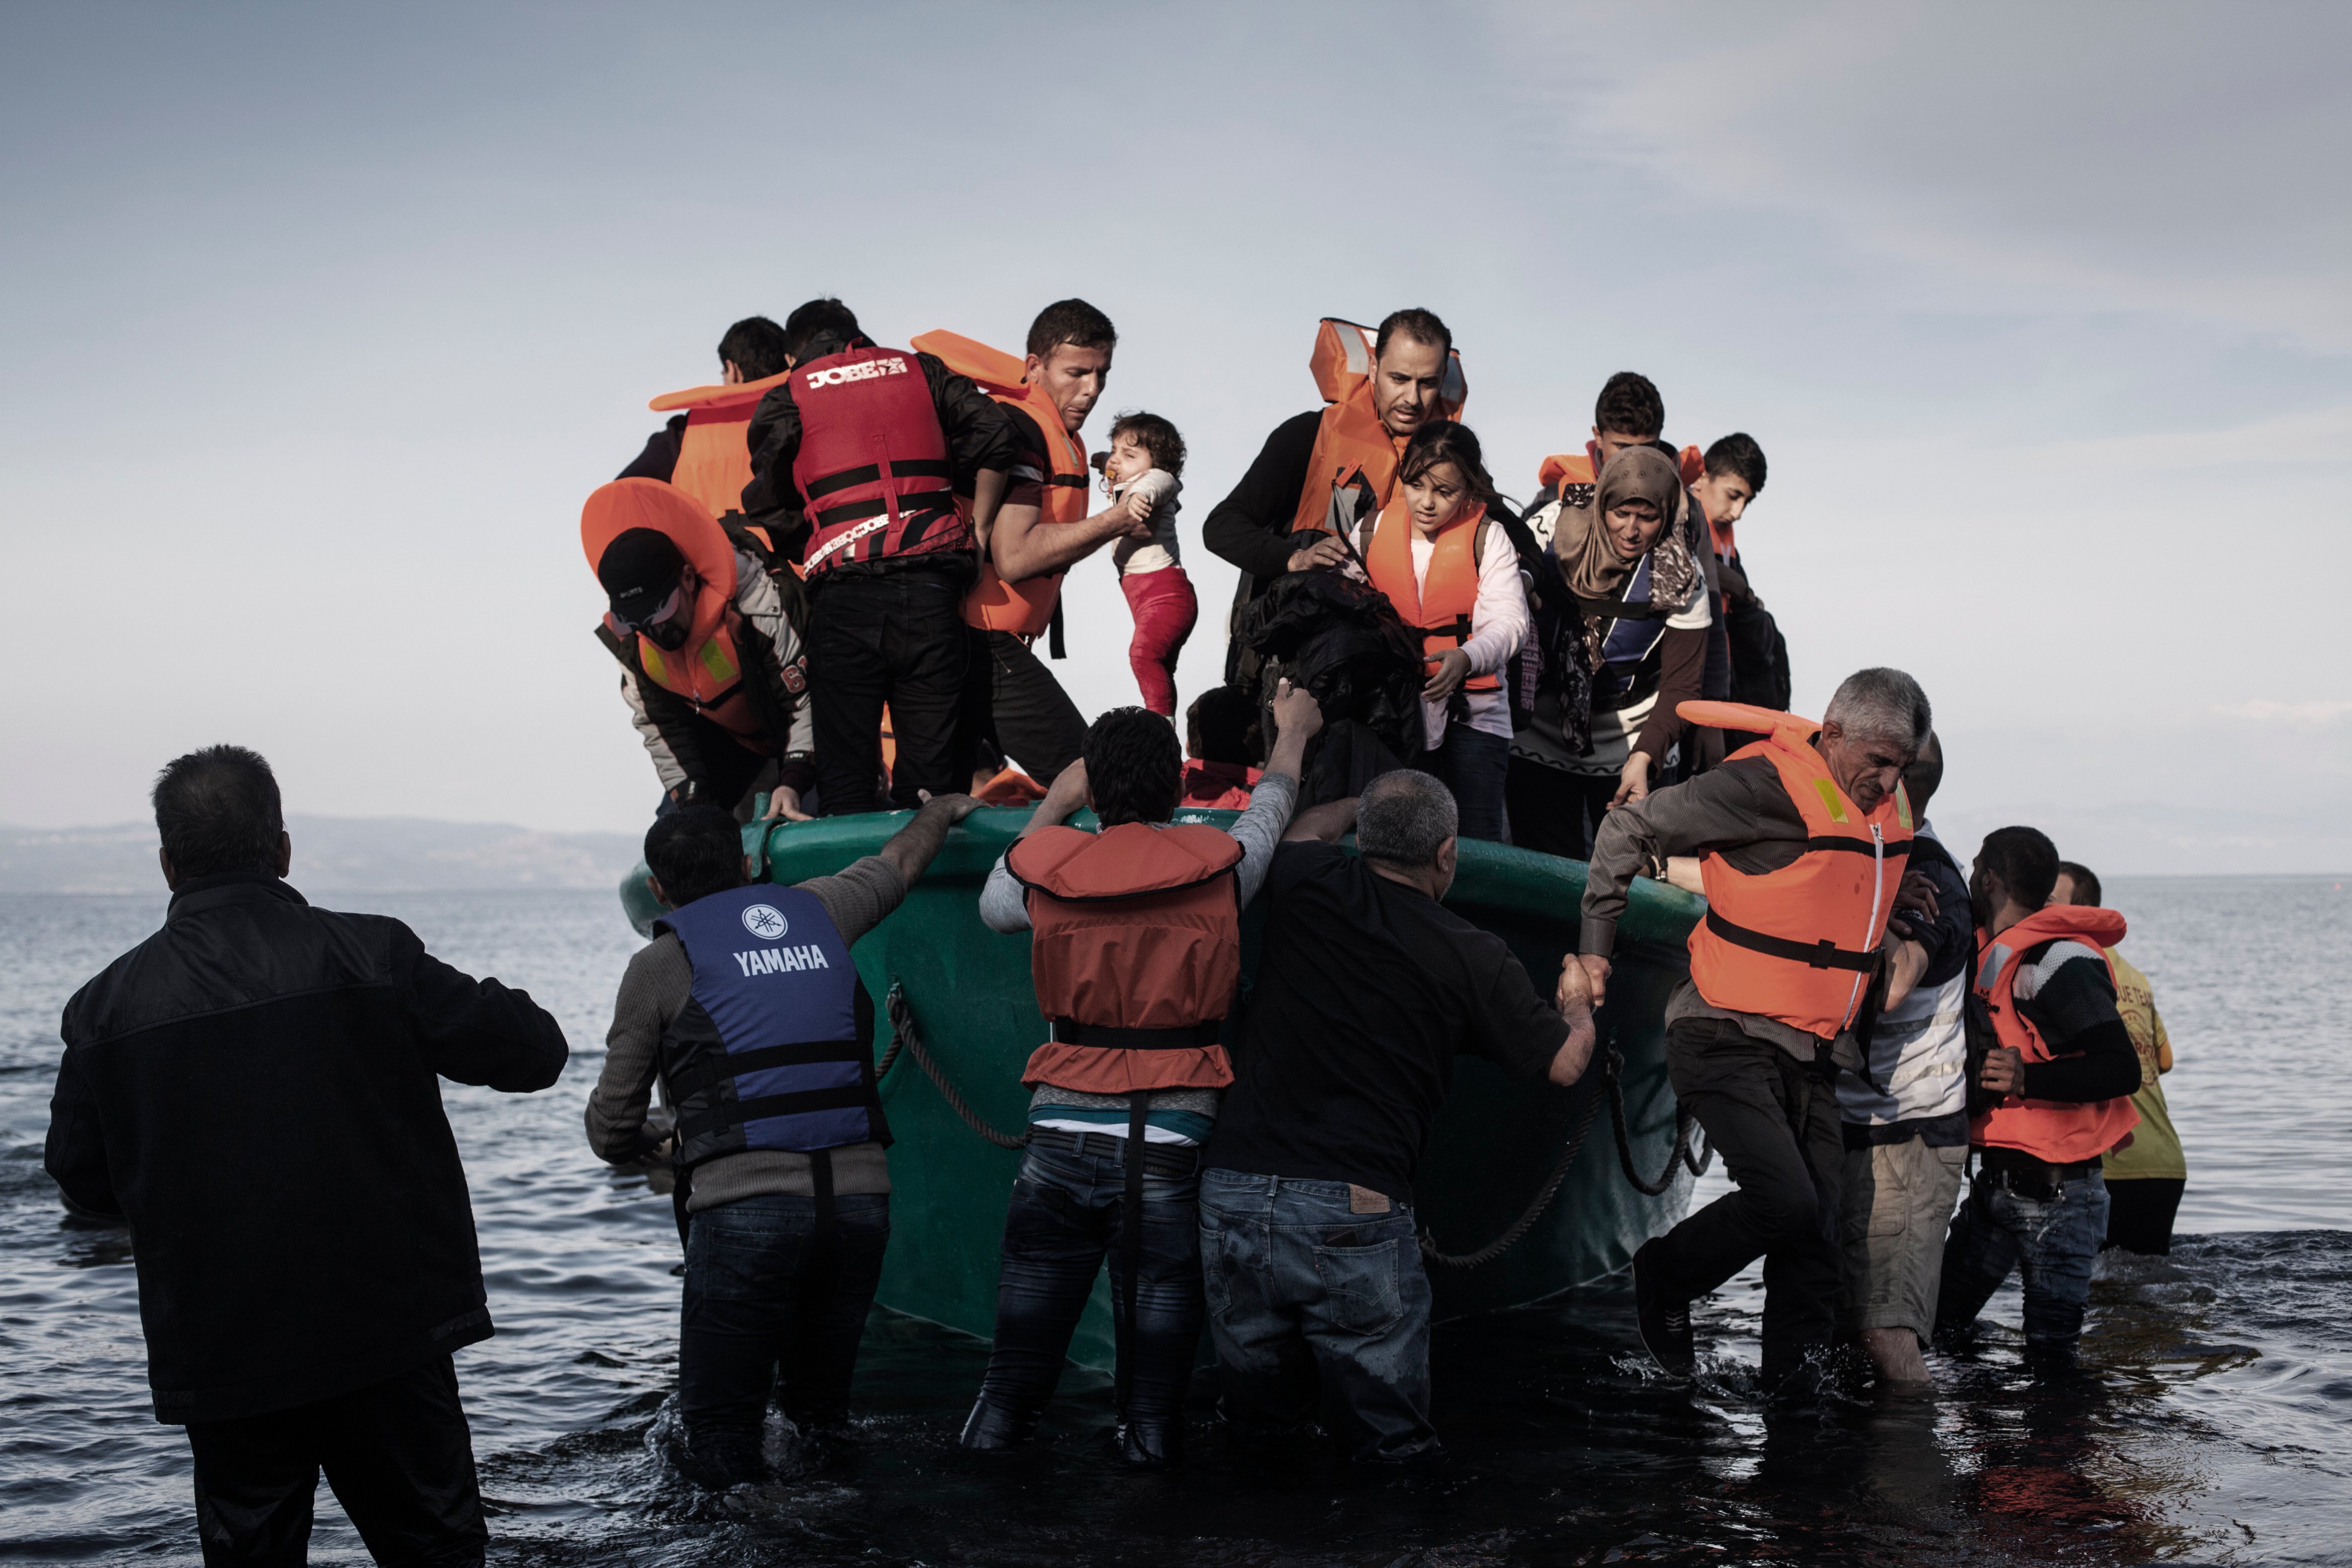 Refugees from Afghanistan and Syria arrive in boats on the shores of Lesbos near Skala Sikaminias, Greece on Nov. 10 2015. (Etienne de Malglaive—Getty Images)